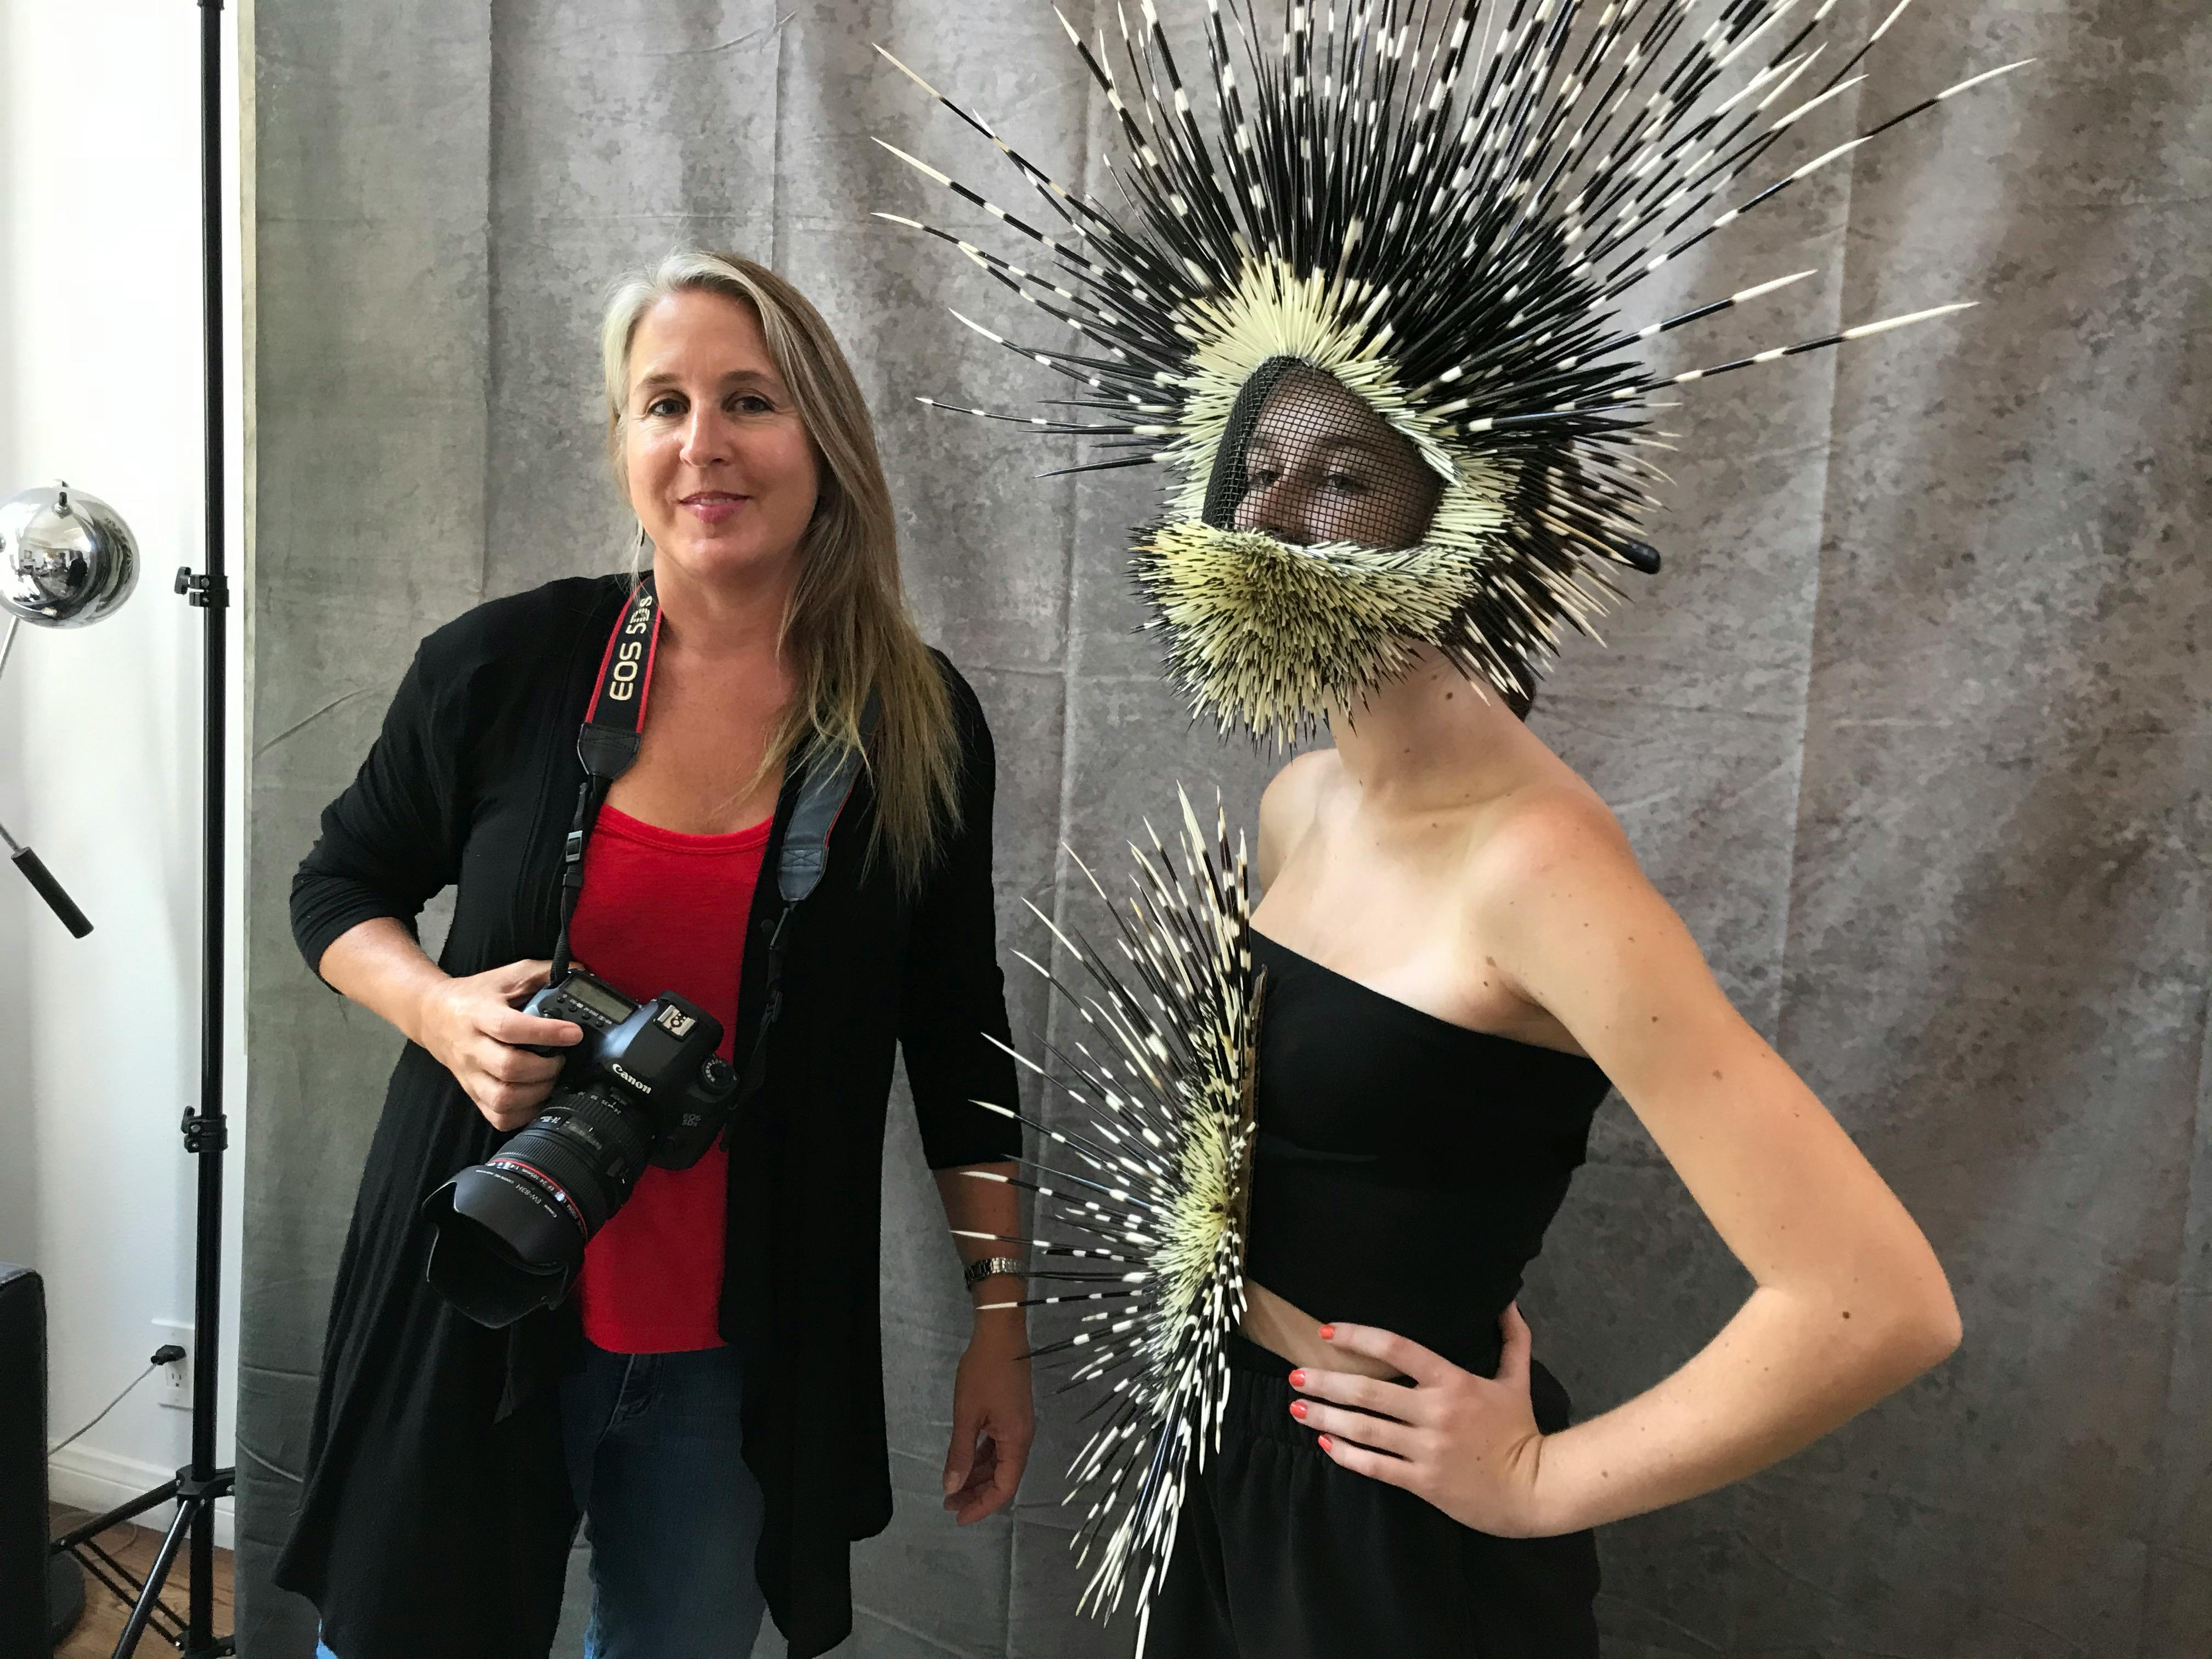 photographer with camera standing beside model wearing a helmet and shirt adorned with porcupine quills